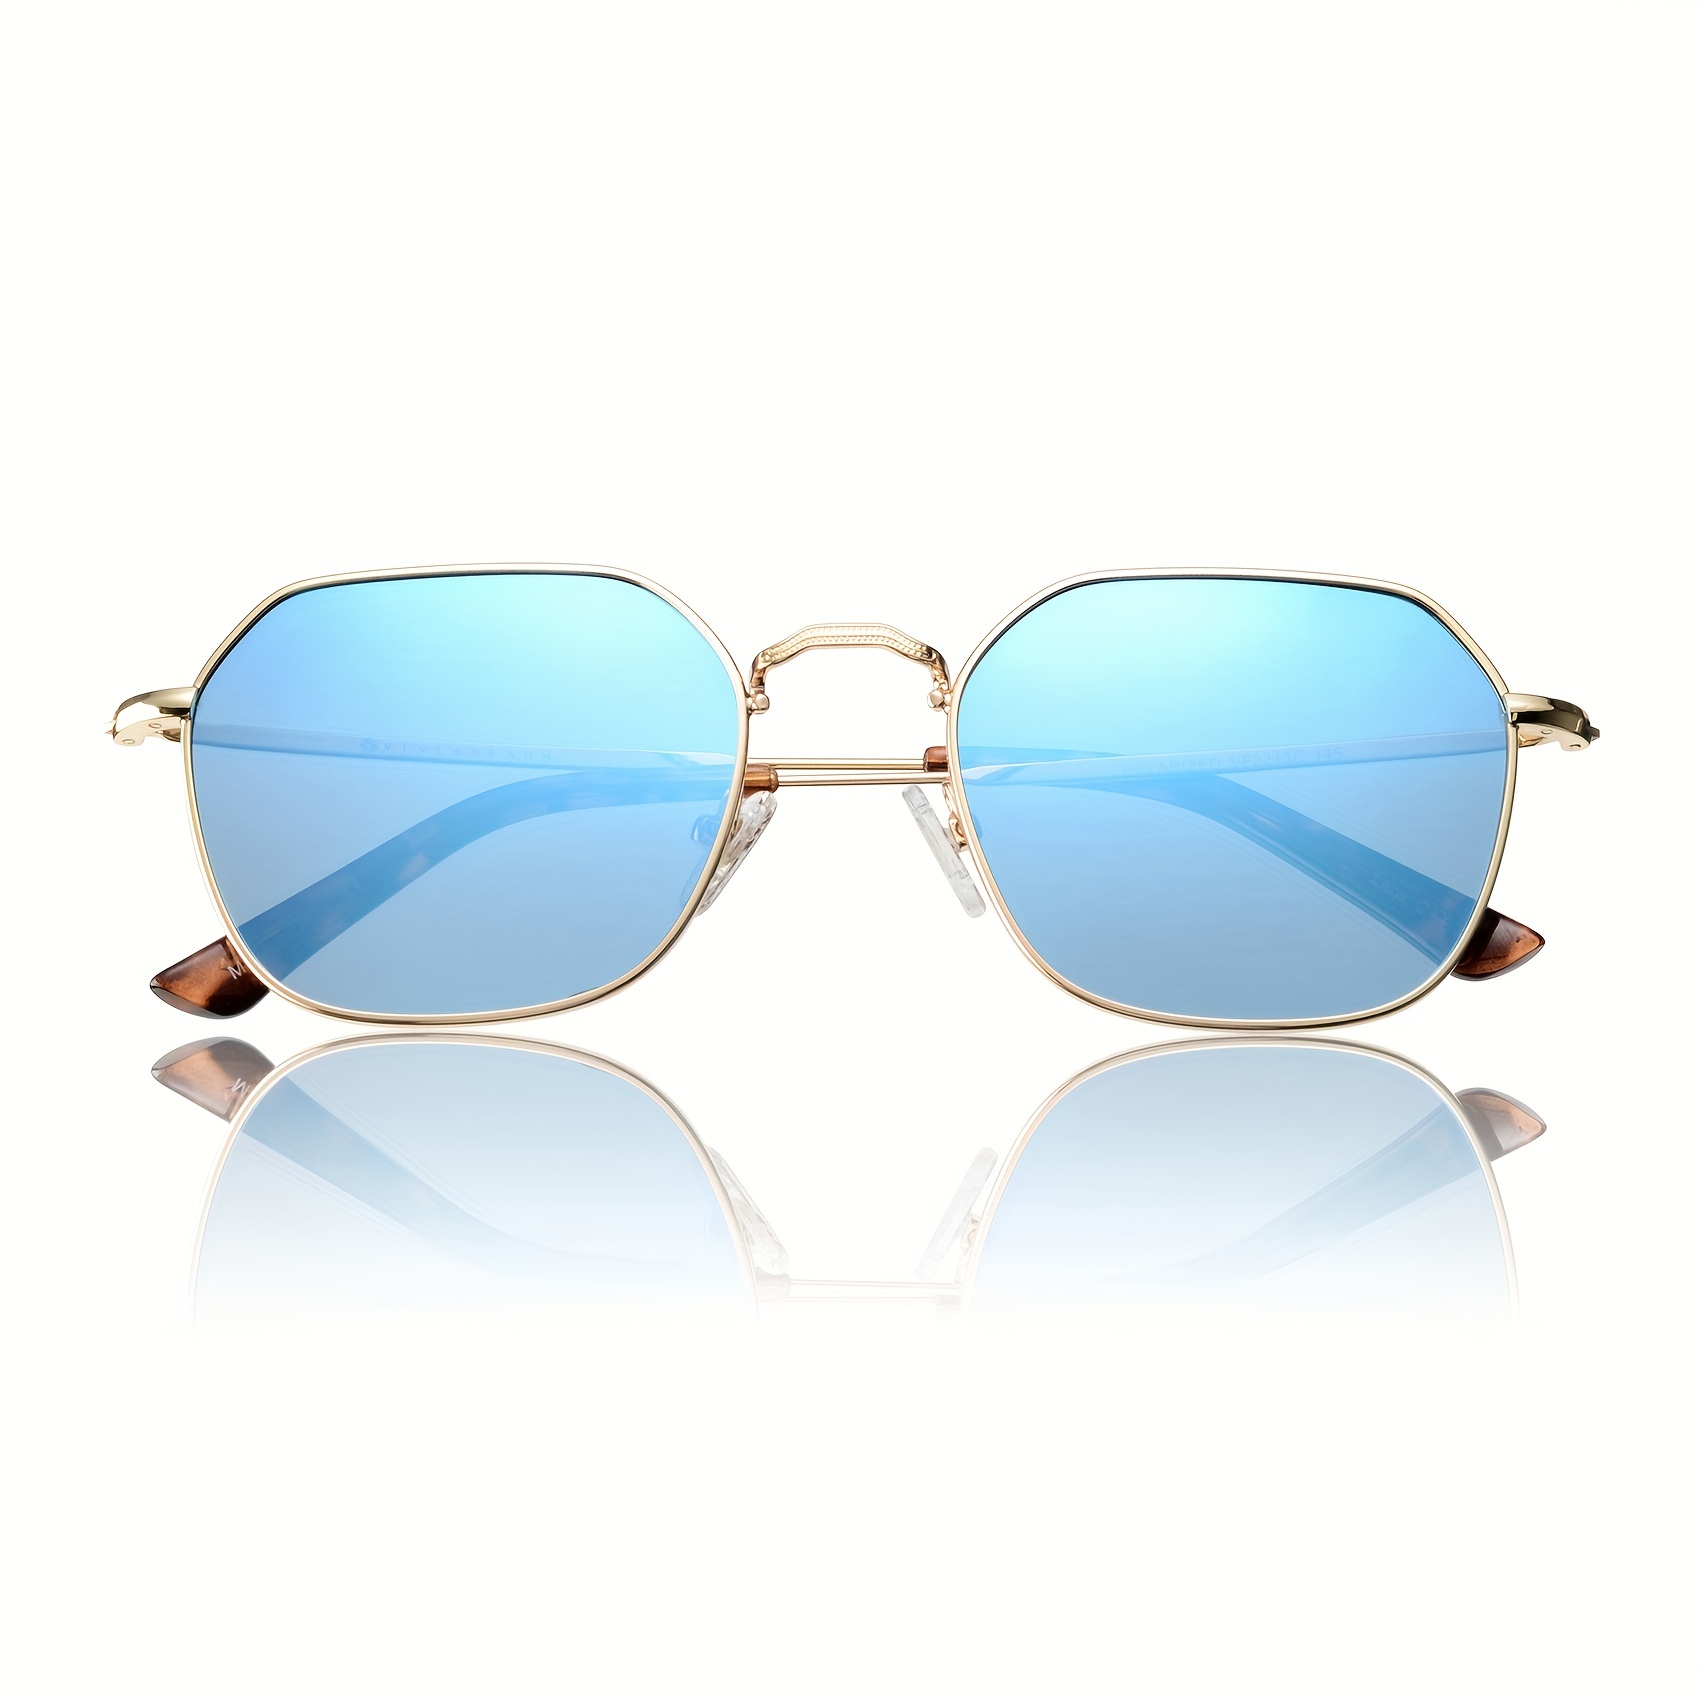 Polarized Hexagonal Square Sunglasses For Men Golden Rim Blue Mirrored Lens Shady  Rays Eyewear Vf2213c, Check Out Today's Deals Now